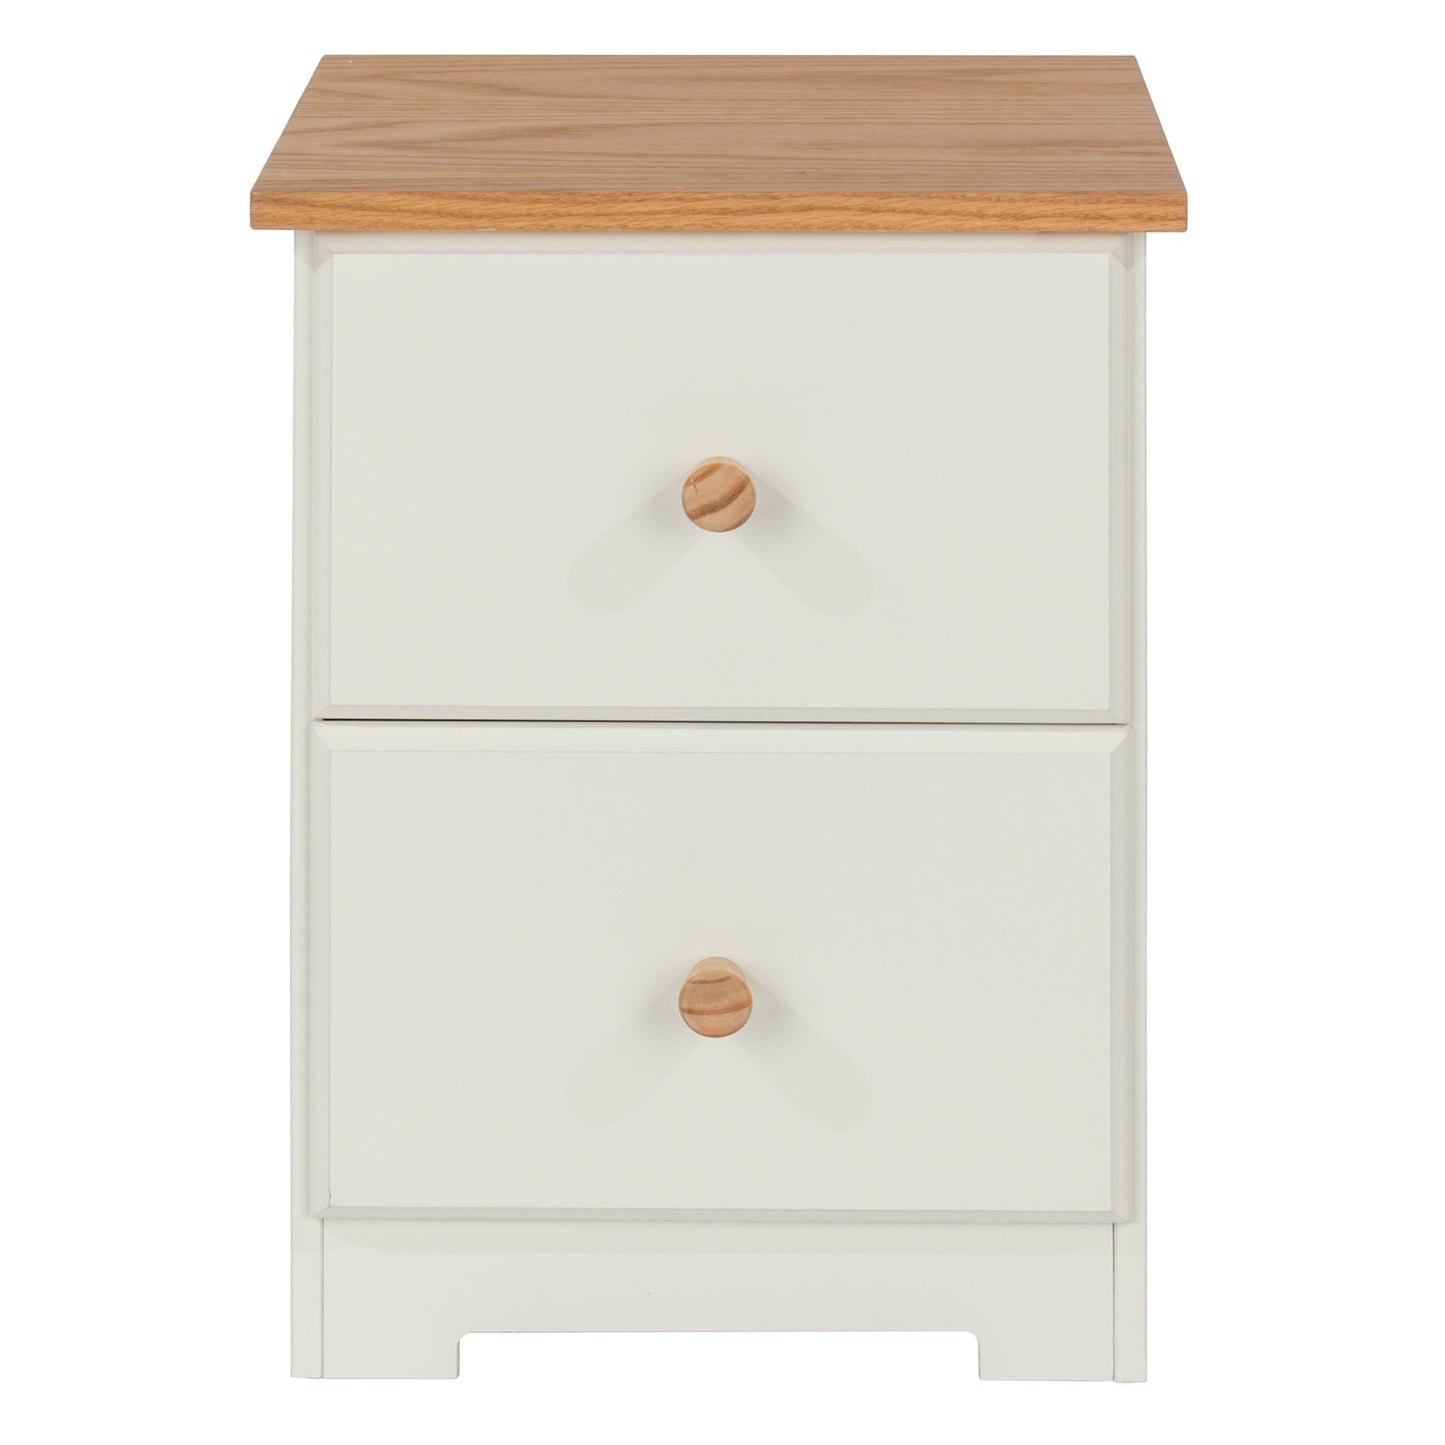 Colorado 2 Drawer Compact Bedside Cabinet